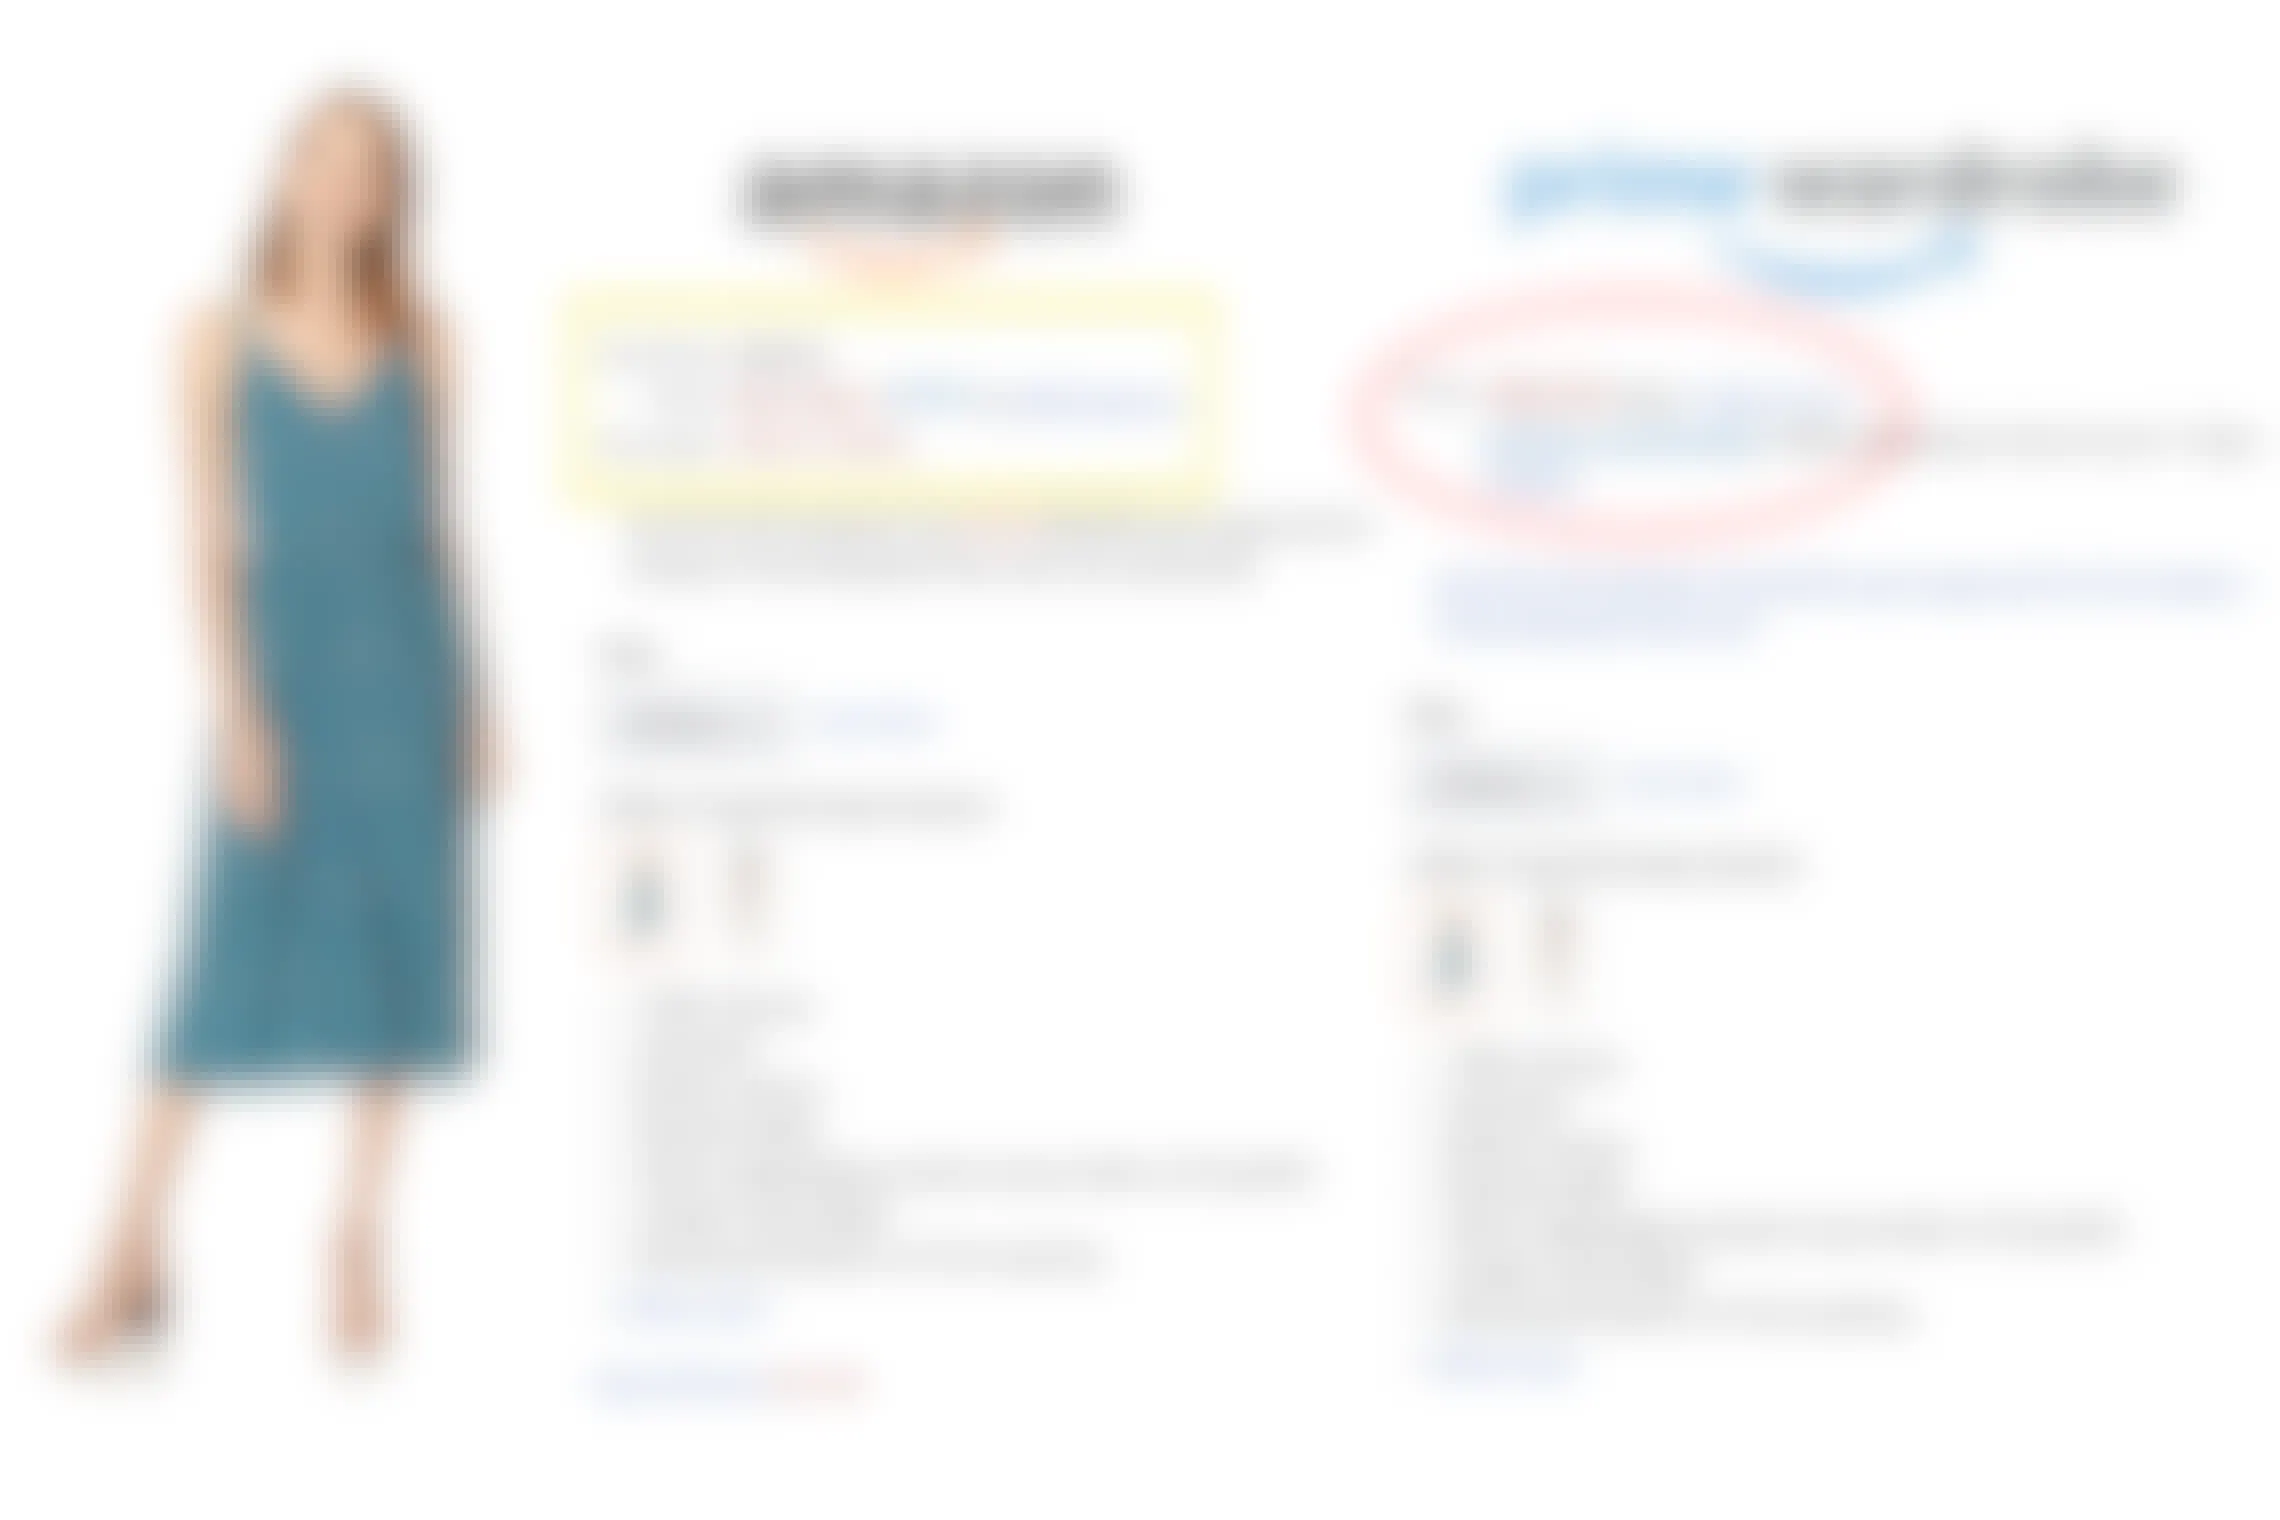 Price comparison of a dress on amazon verses the same dress from amazon prime wardrobe.